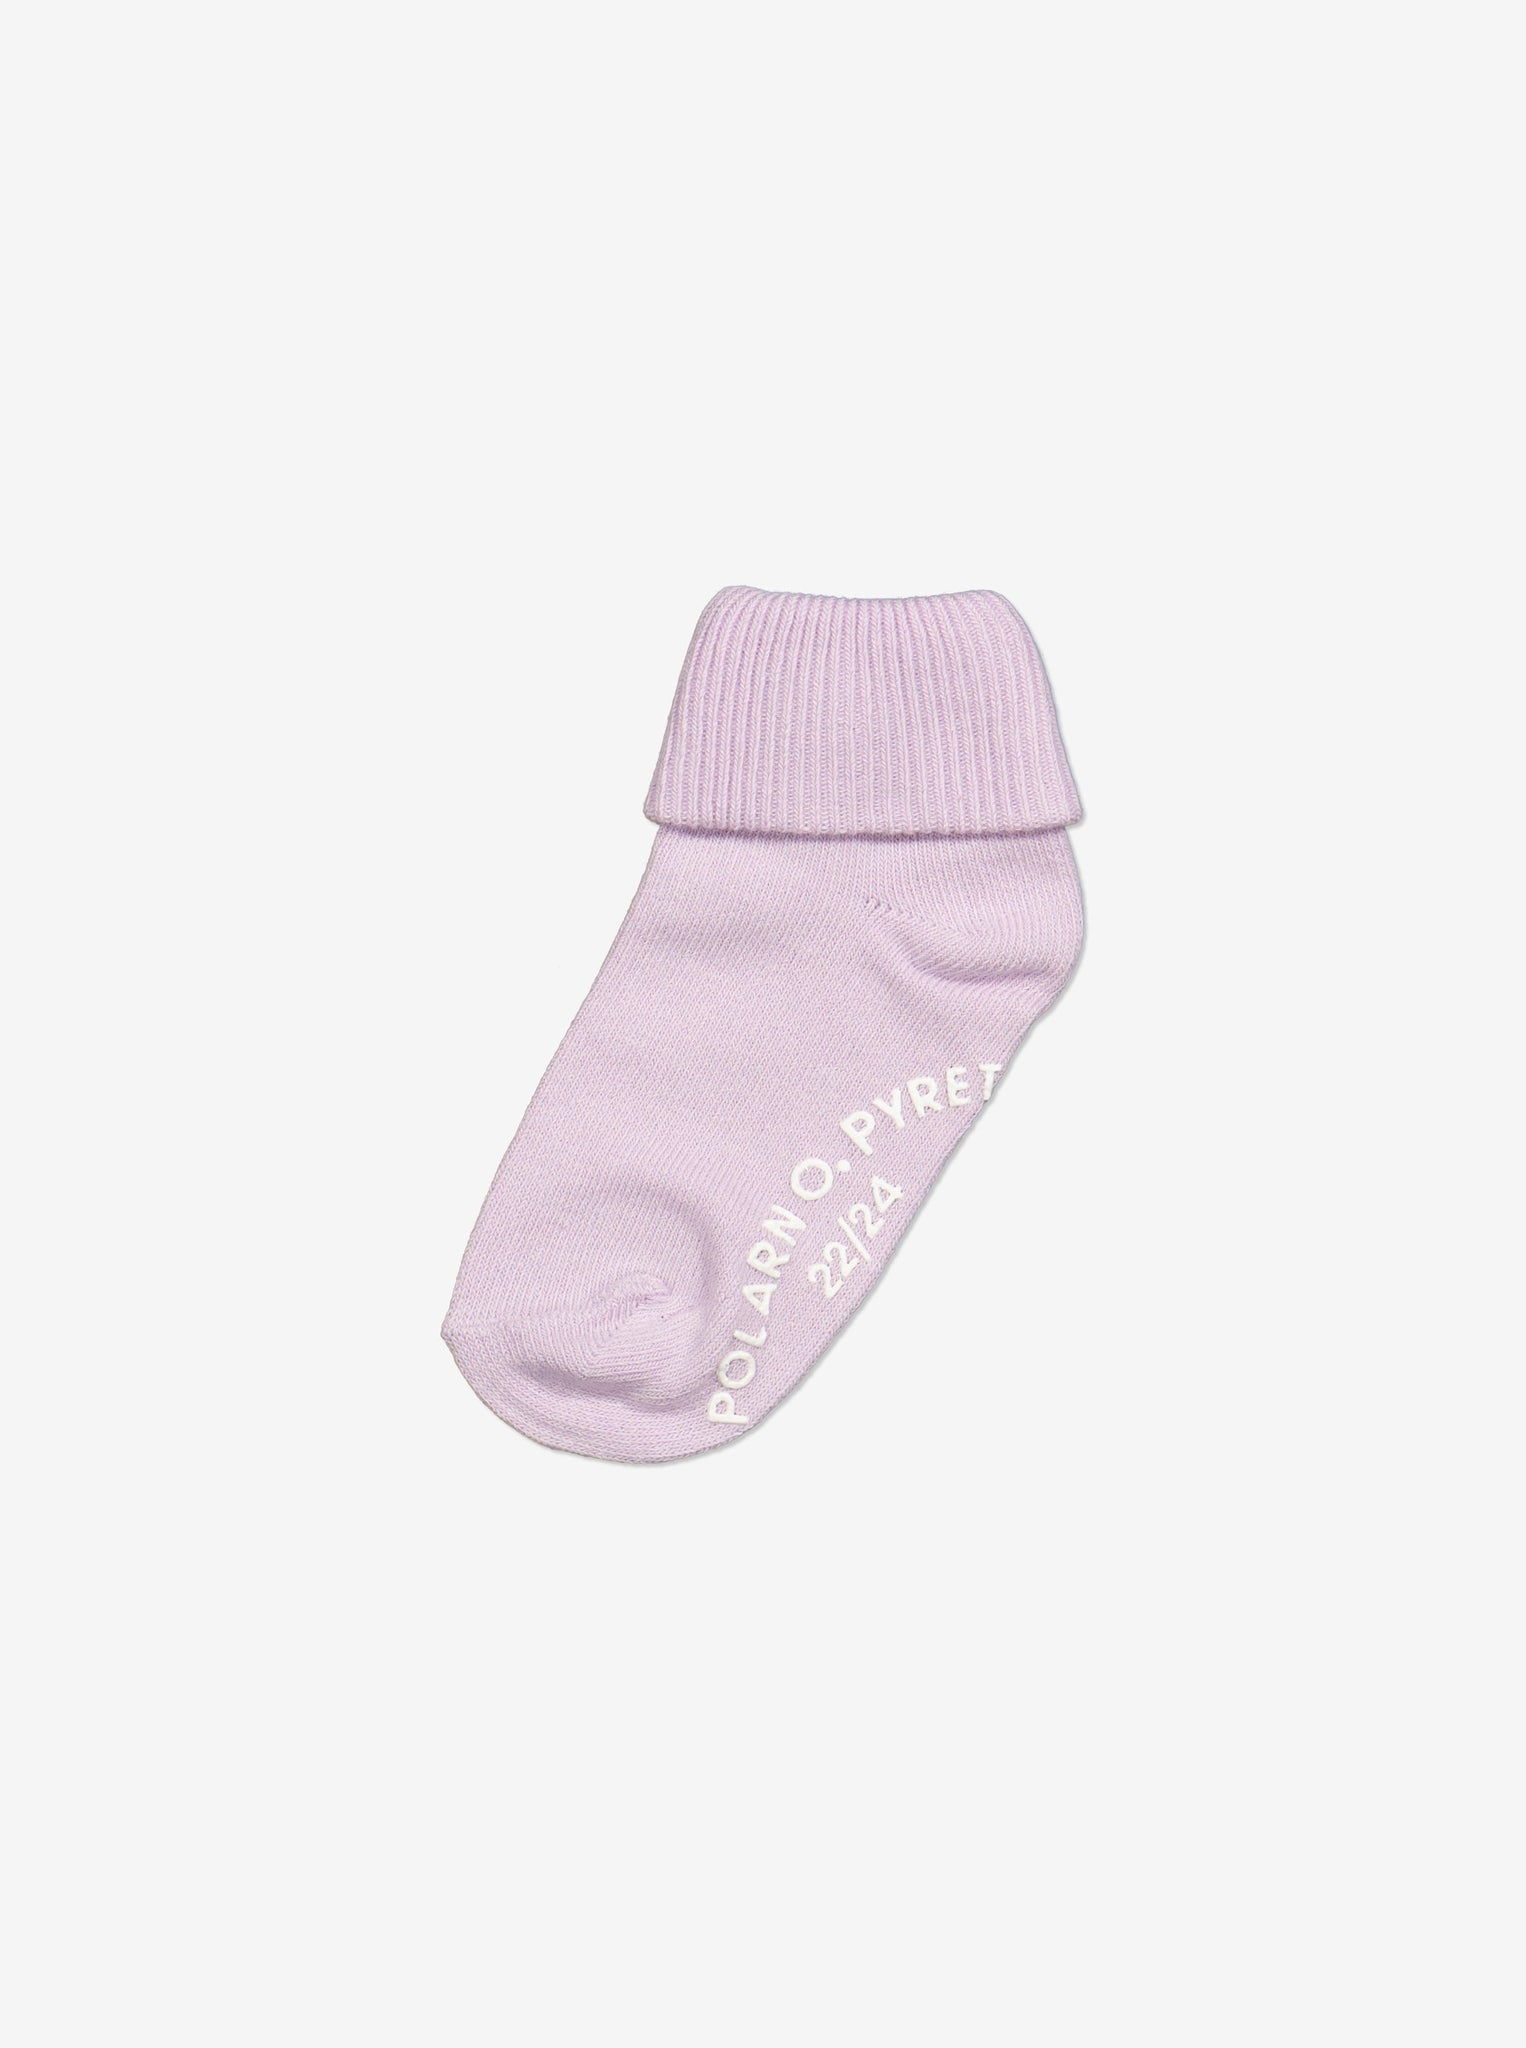  Organic Pink Antislip Kids Socks Multipack from Polarn O. Pyret Kidswear. Made from sustainable materials.